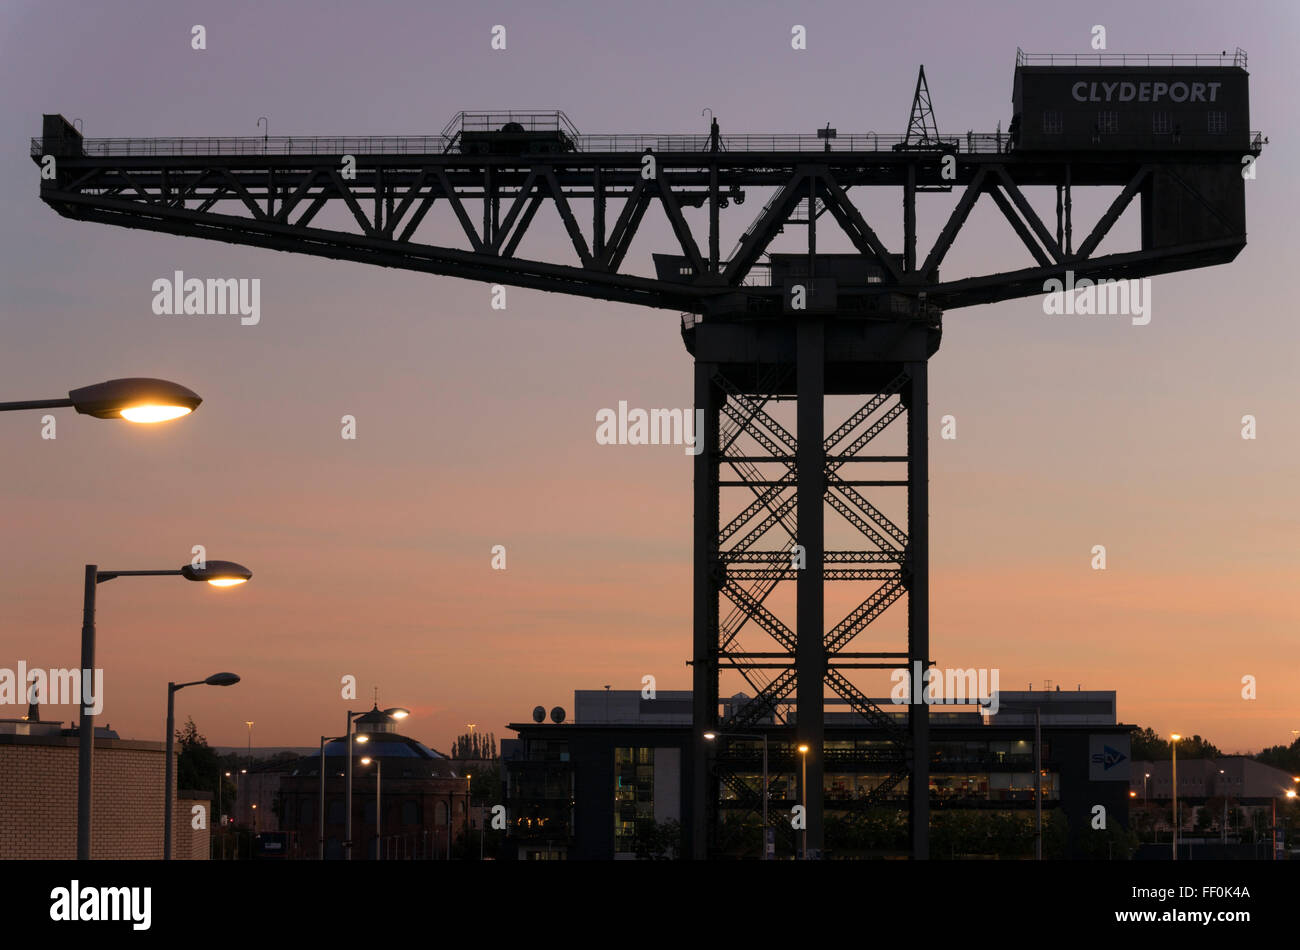 Clydeport titan crane, Finnieston,Glasgow at dusk, looking due south. Stock Photo